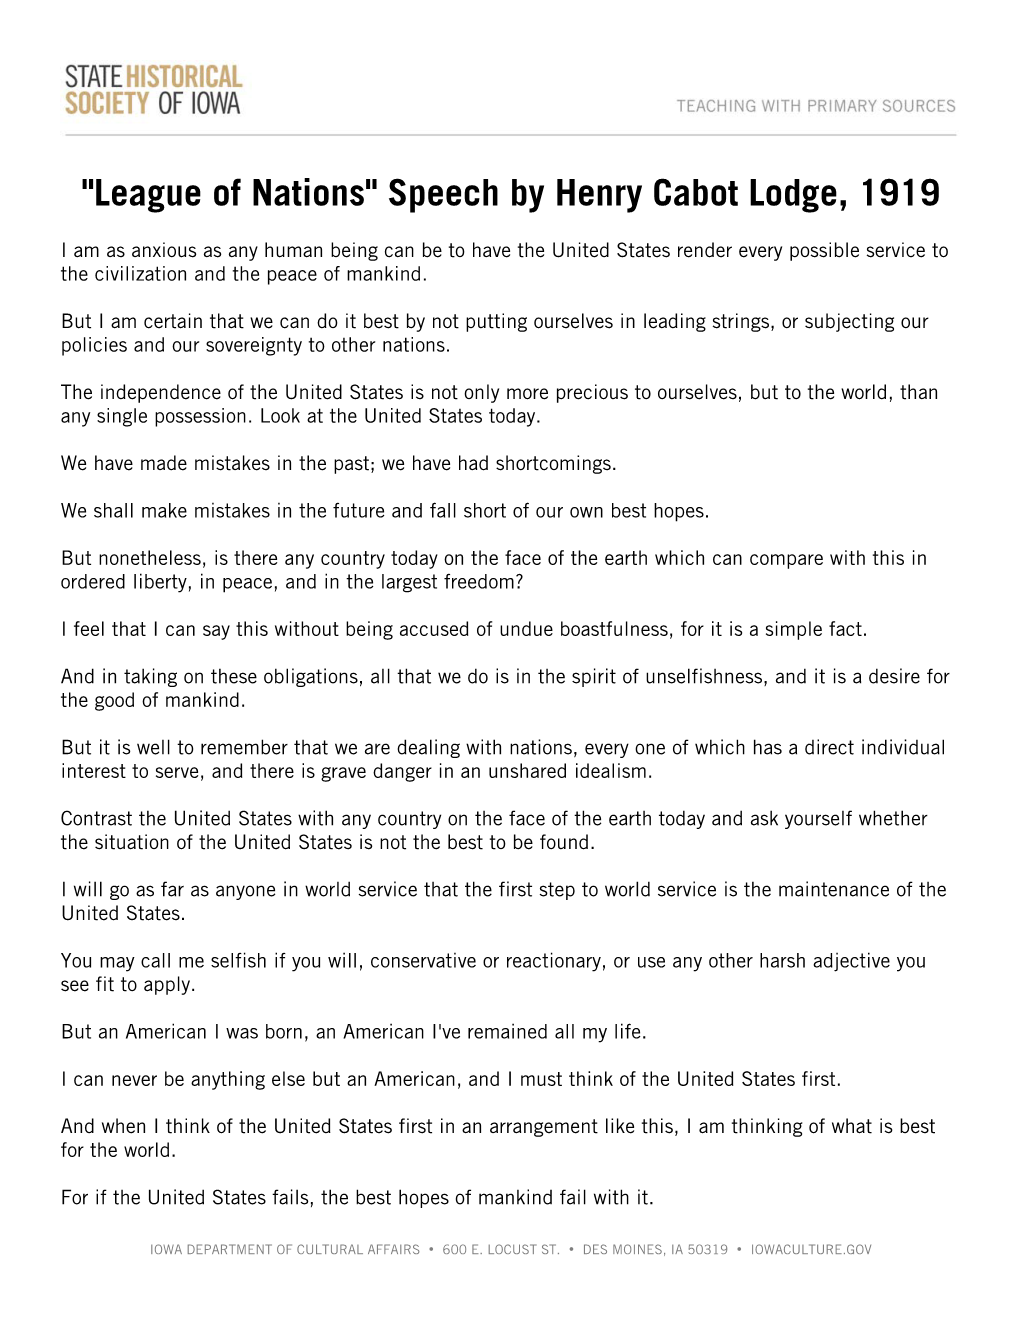 Transcript of Henry Cabot Lodge's